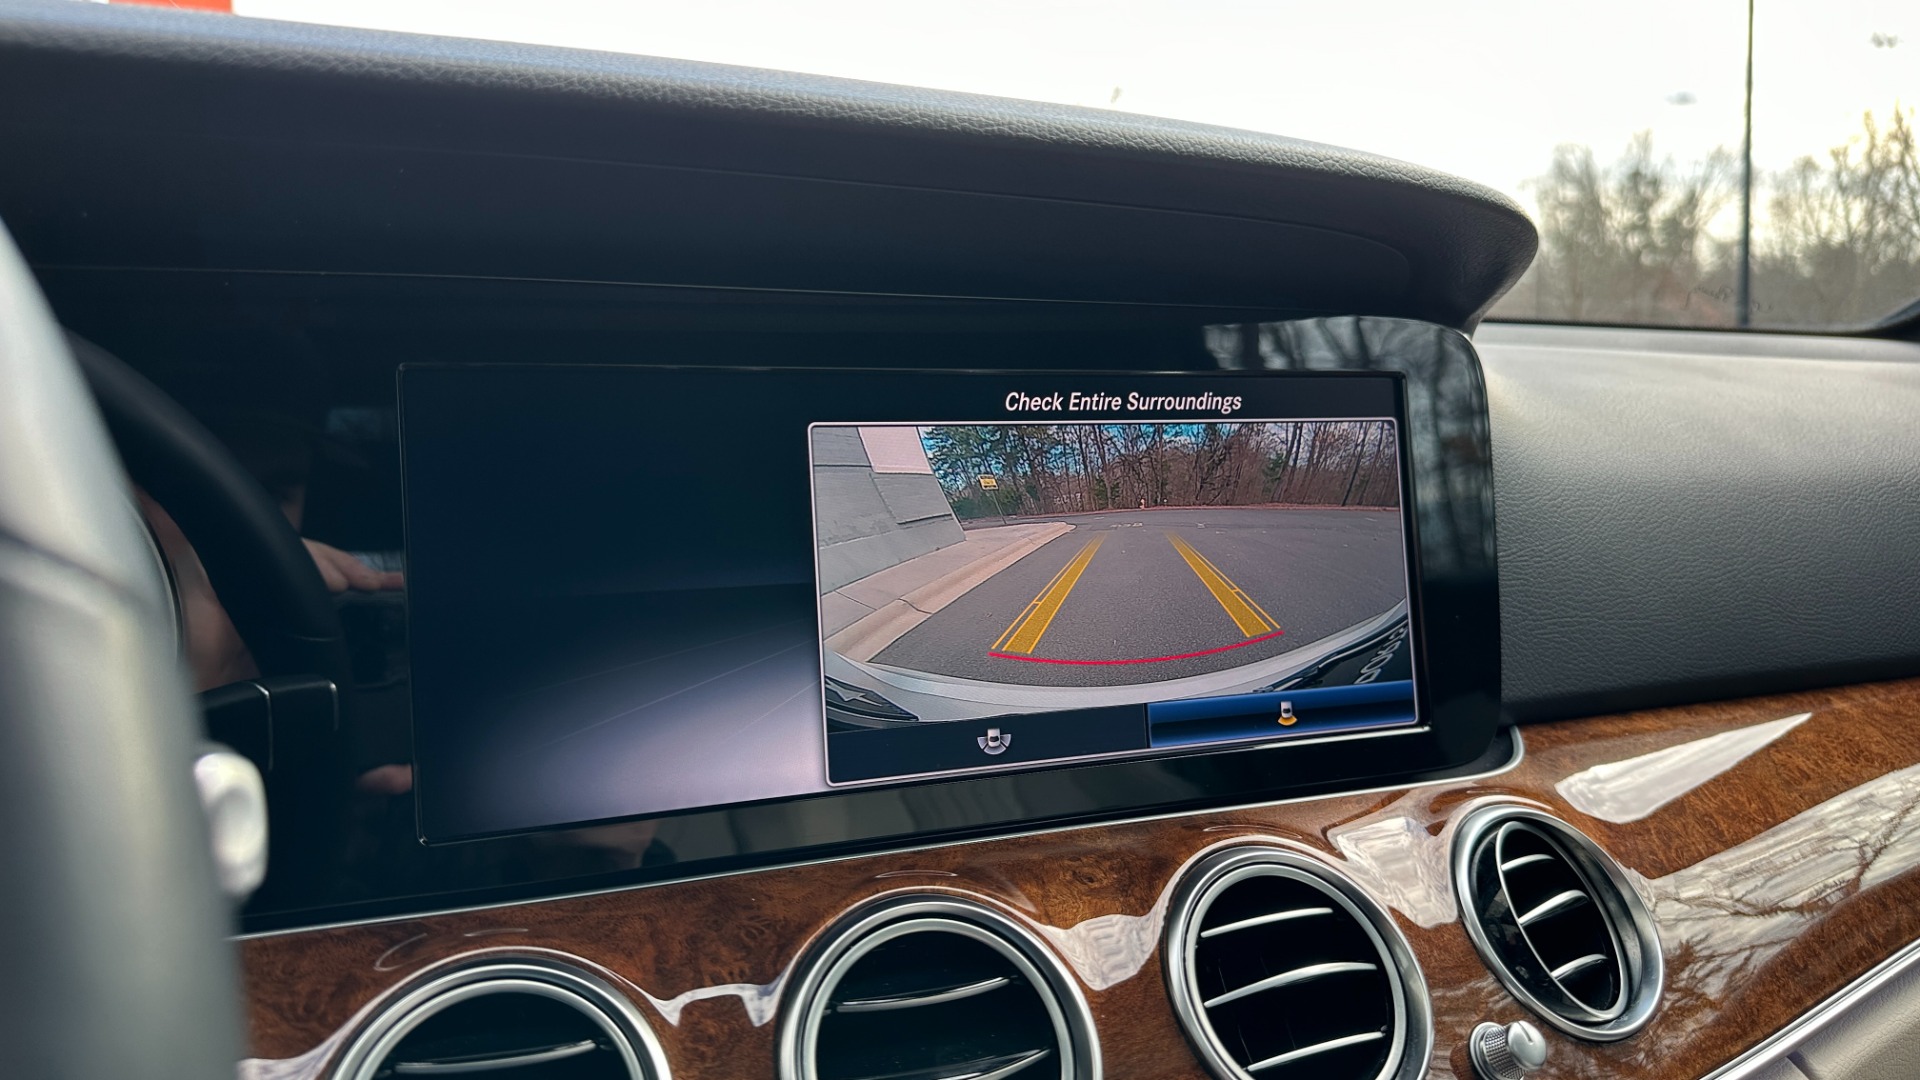 Used 2019 Mercedes-Benz E-Class E300 / PREMIUM PACKAGE / BLIND SPOT / BURMESTER SOUND / HEATED STEERING for sale $41,495 at Formula Imports in Charlotte NC 28227 29